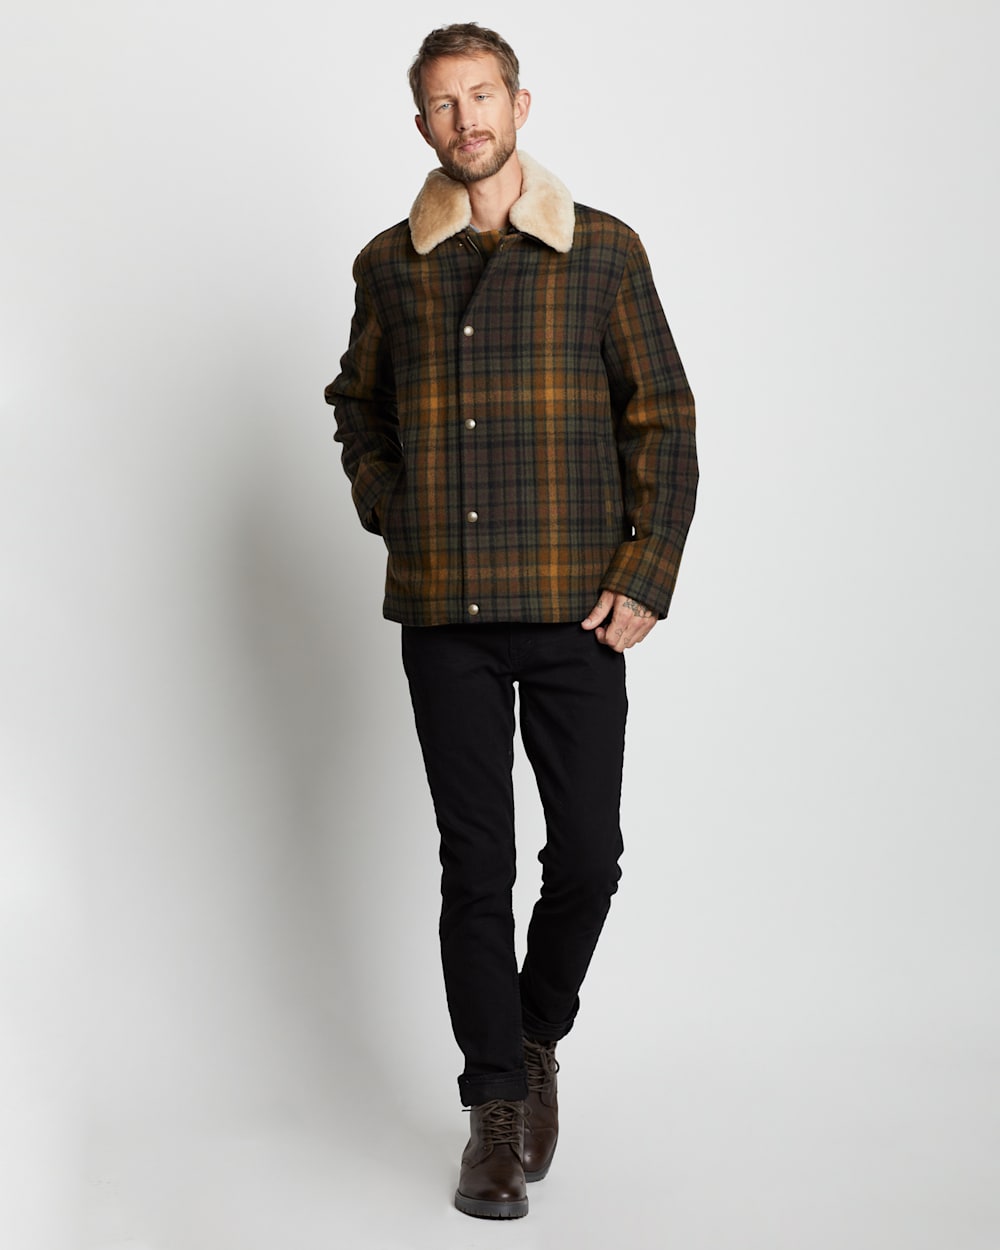 ALTERNATE VIEW OF MEN'S PLAID SILVERTON COAT IN OLIVE/GREEN image number 2